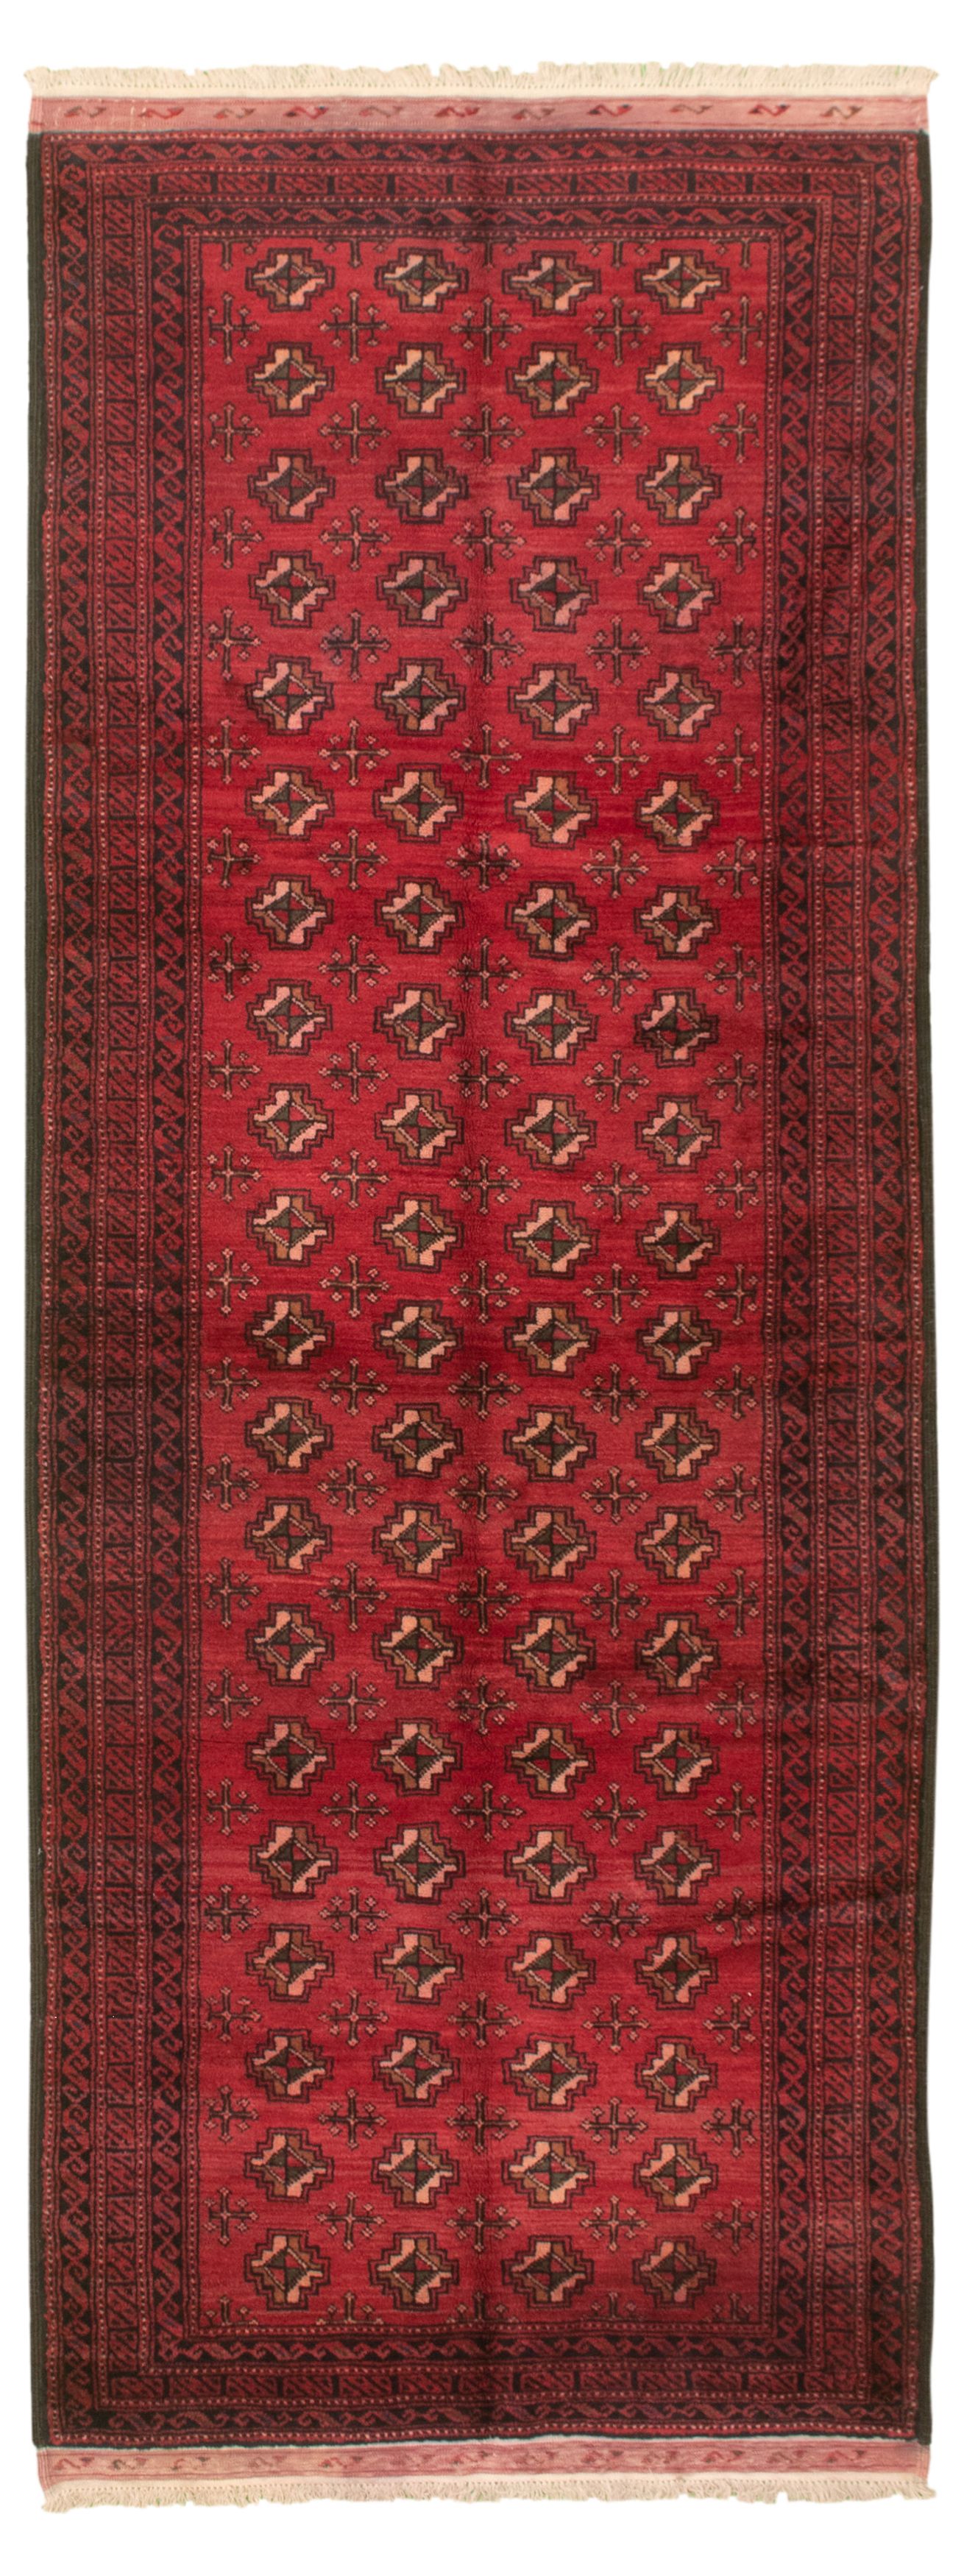 Hand-knotted Authentic Turkish Red Wool Rug 3'5" x 9'2" Size: 3'5" x 9'2"  